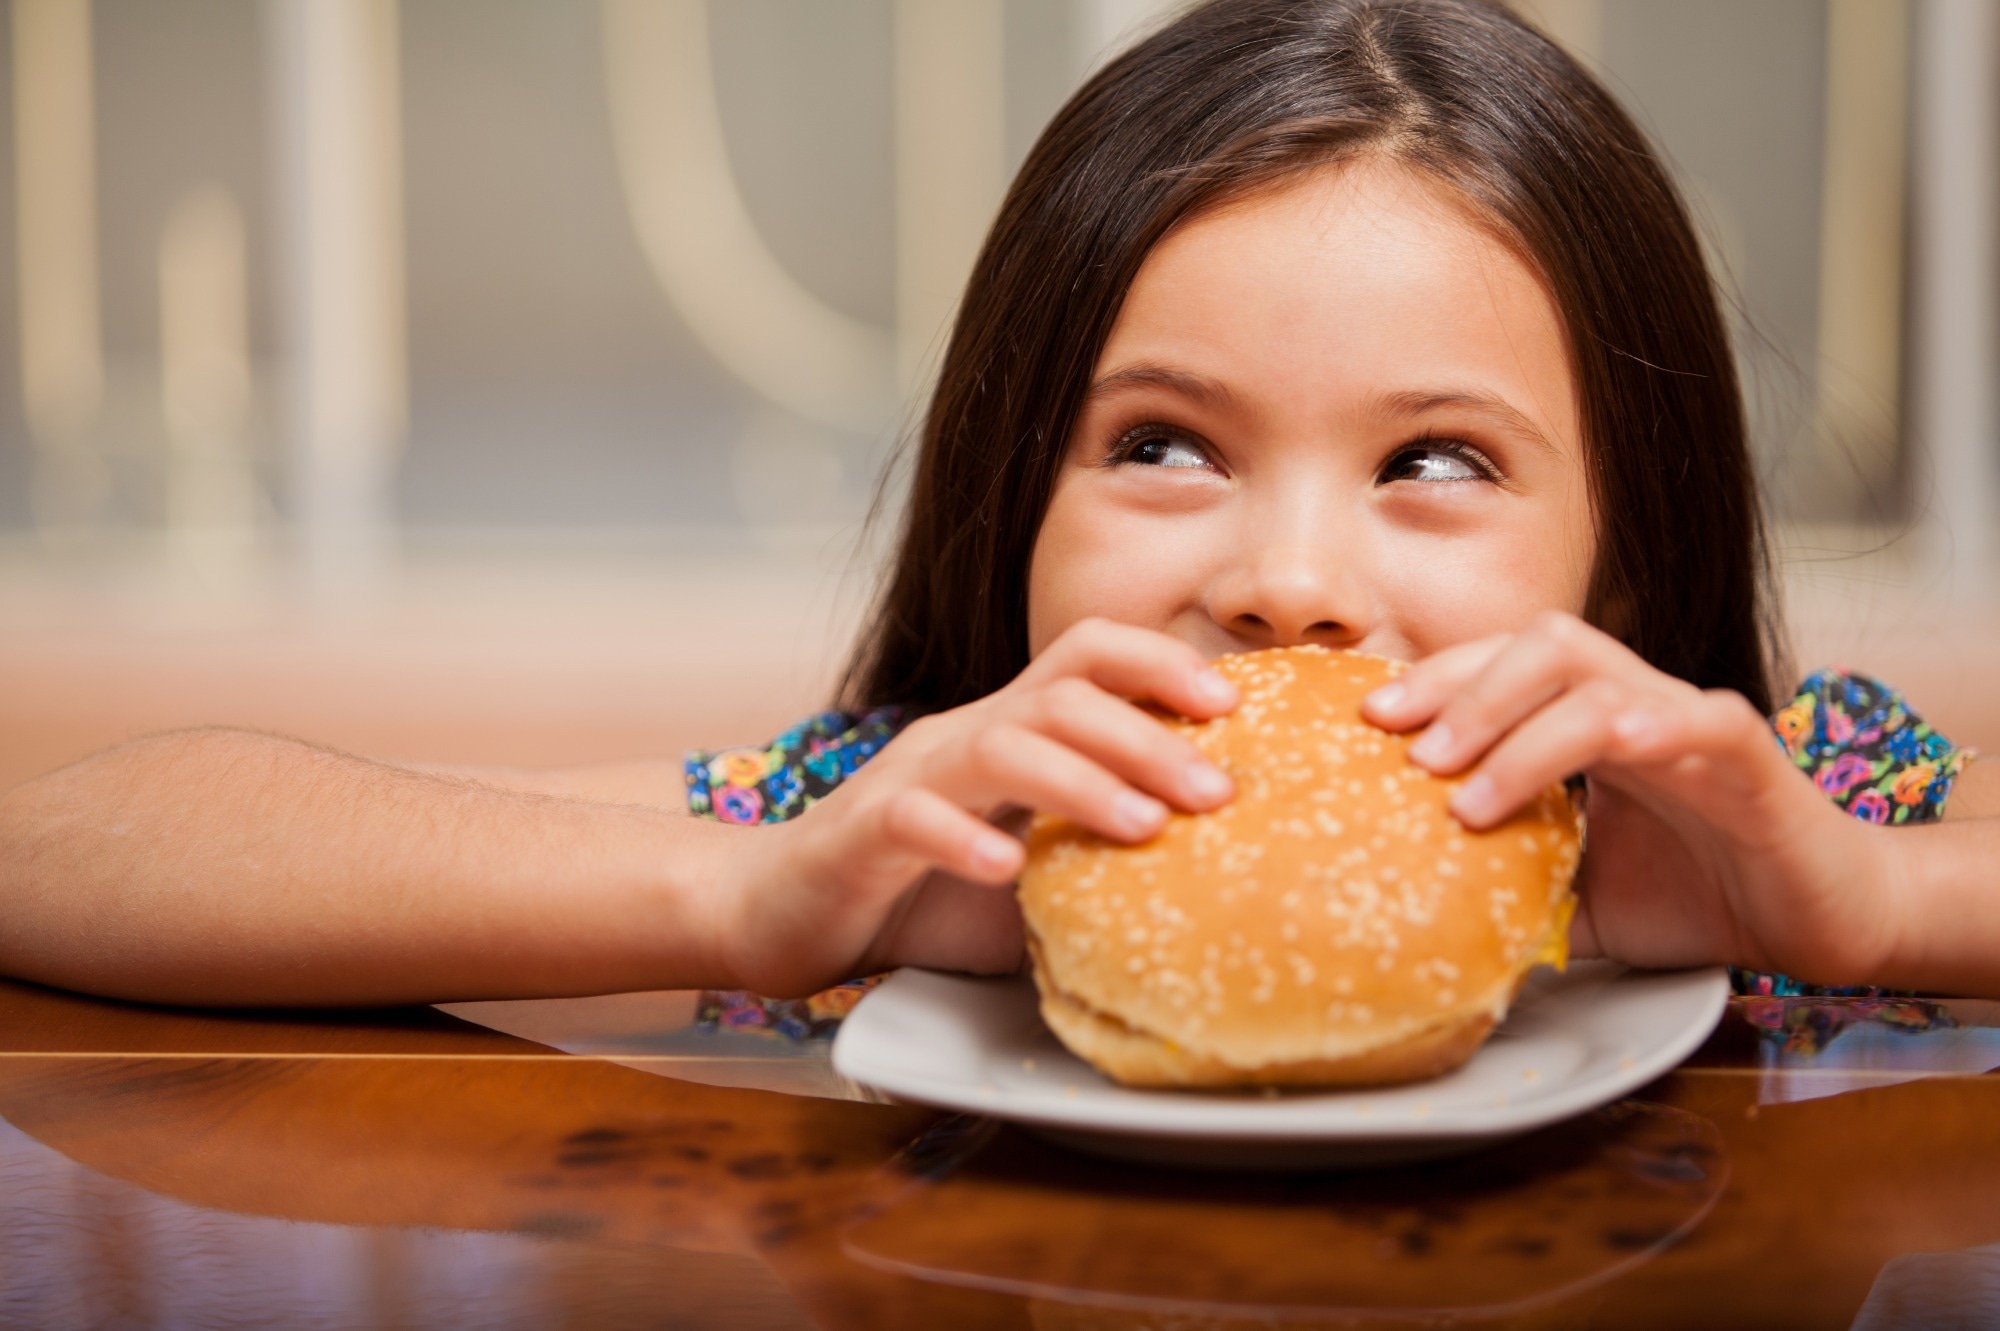 Processed danger: Industrial food additives and the health risks to children